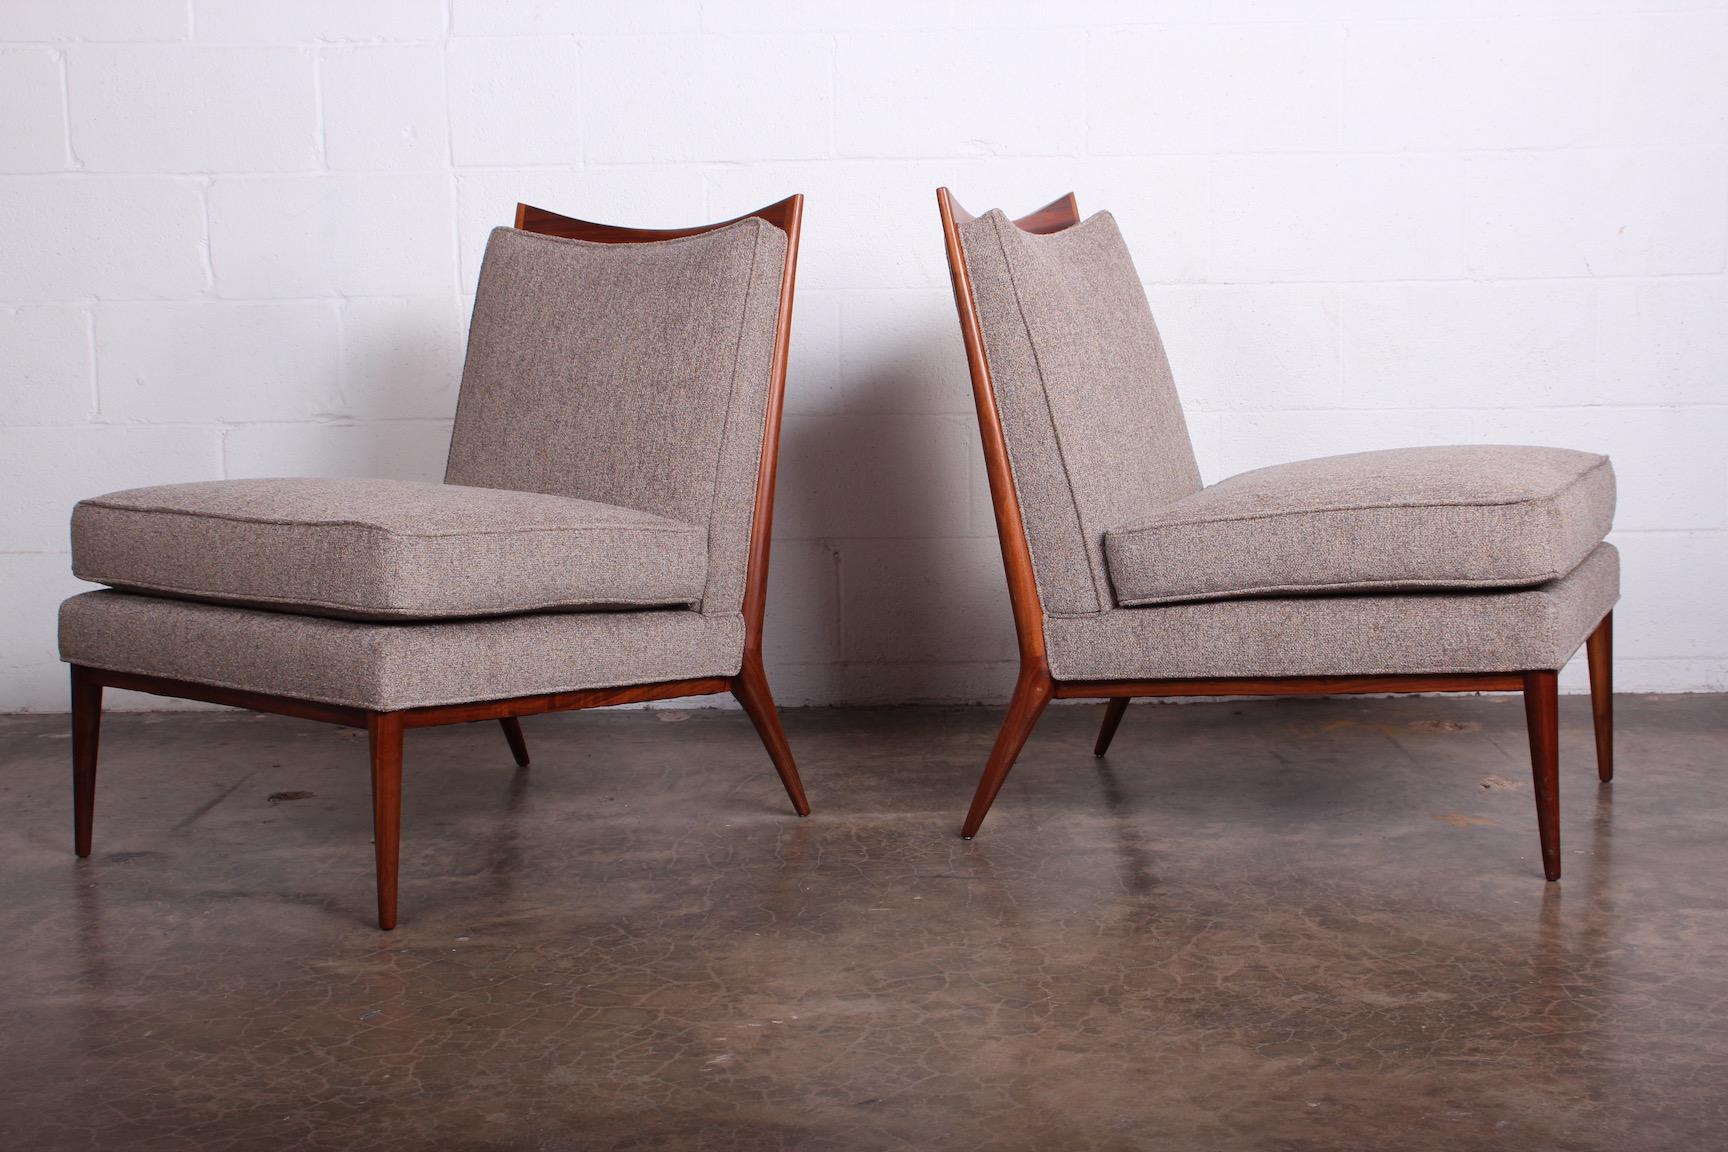 A pair of slipper chairs with walnut frames. Designed by Paul McCobb.